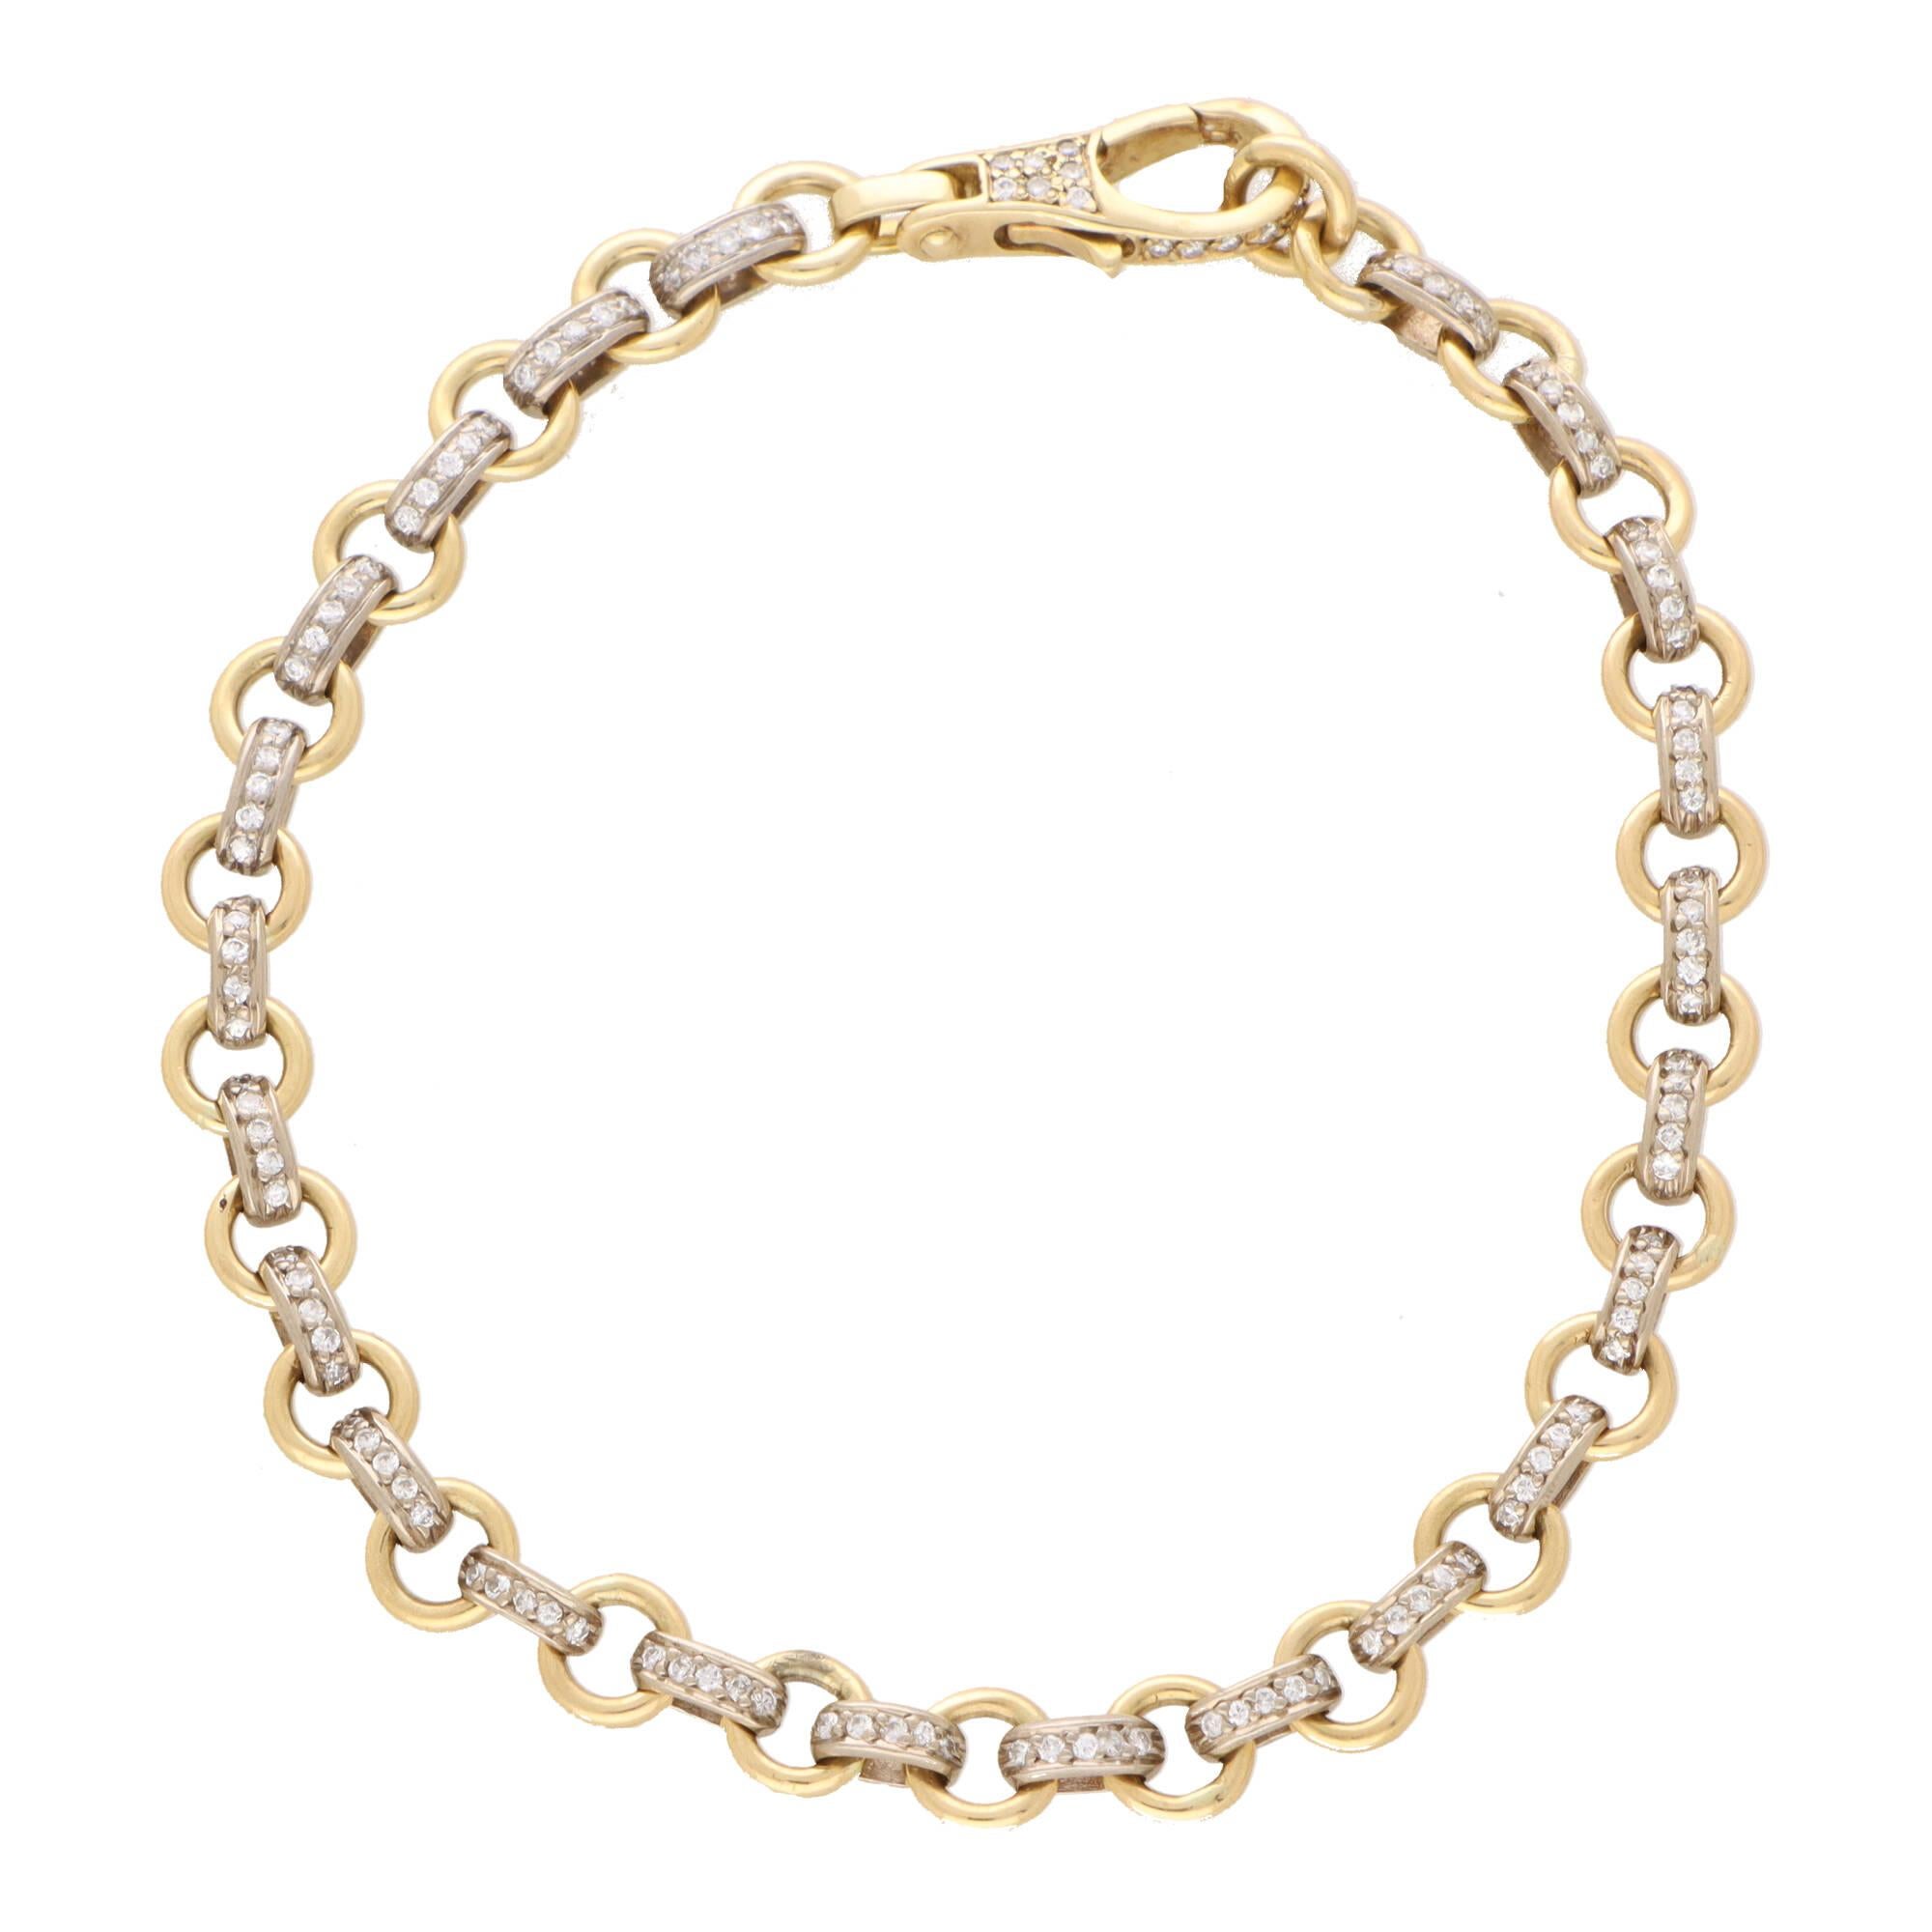 Round Cut Vintage Retro Diamond Chain Link Bracelet in 19k Yellow and White Gold